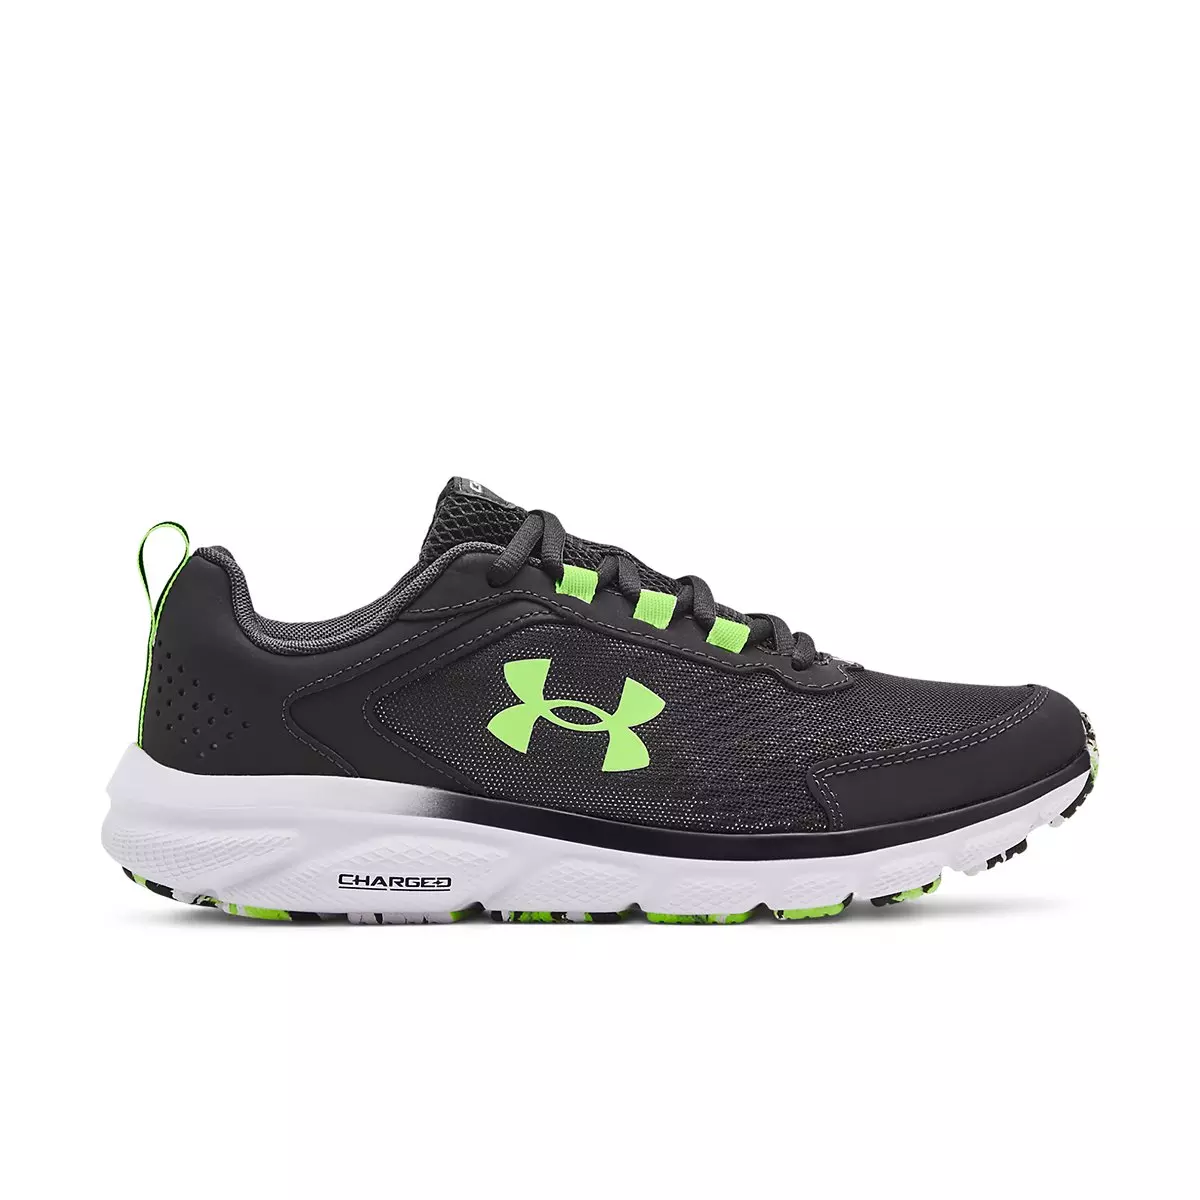 Under Armour Charged Assert 9 Marble Jet Grey/White Men's